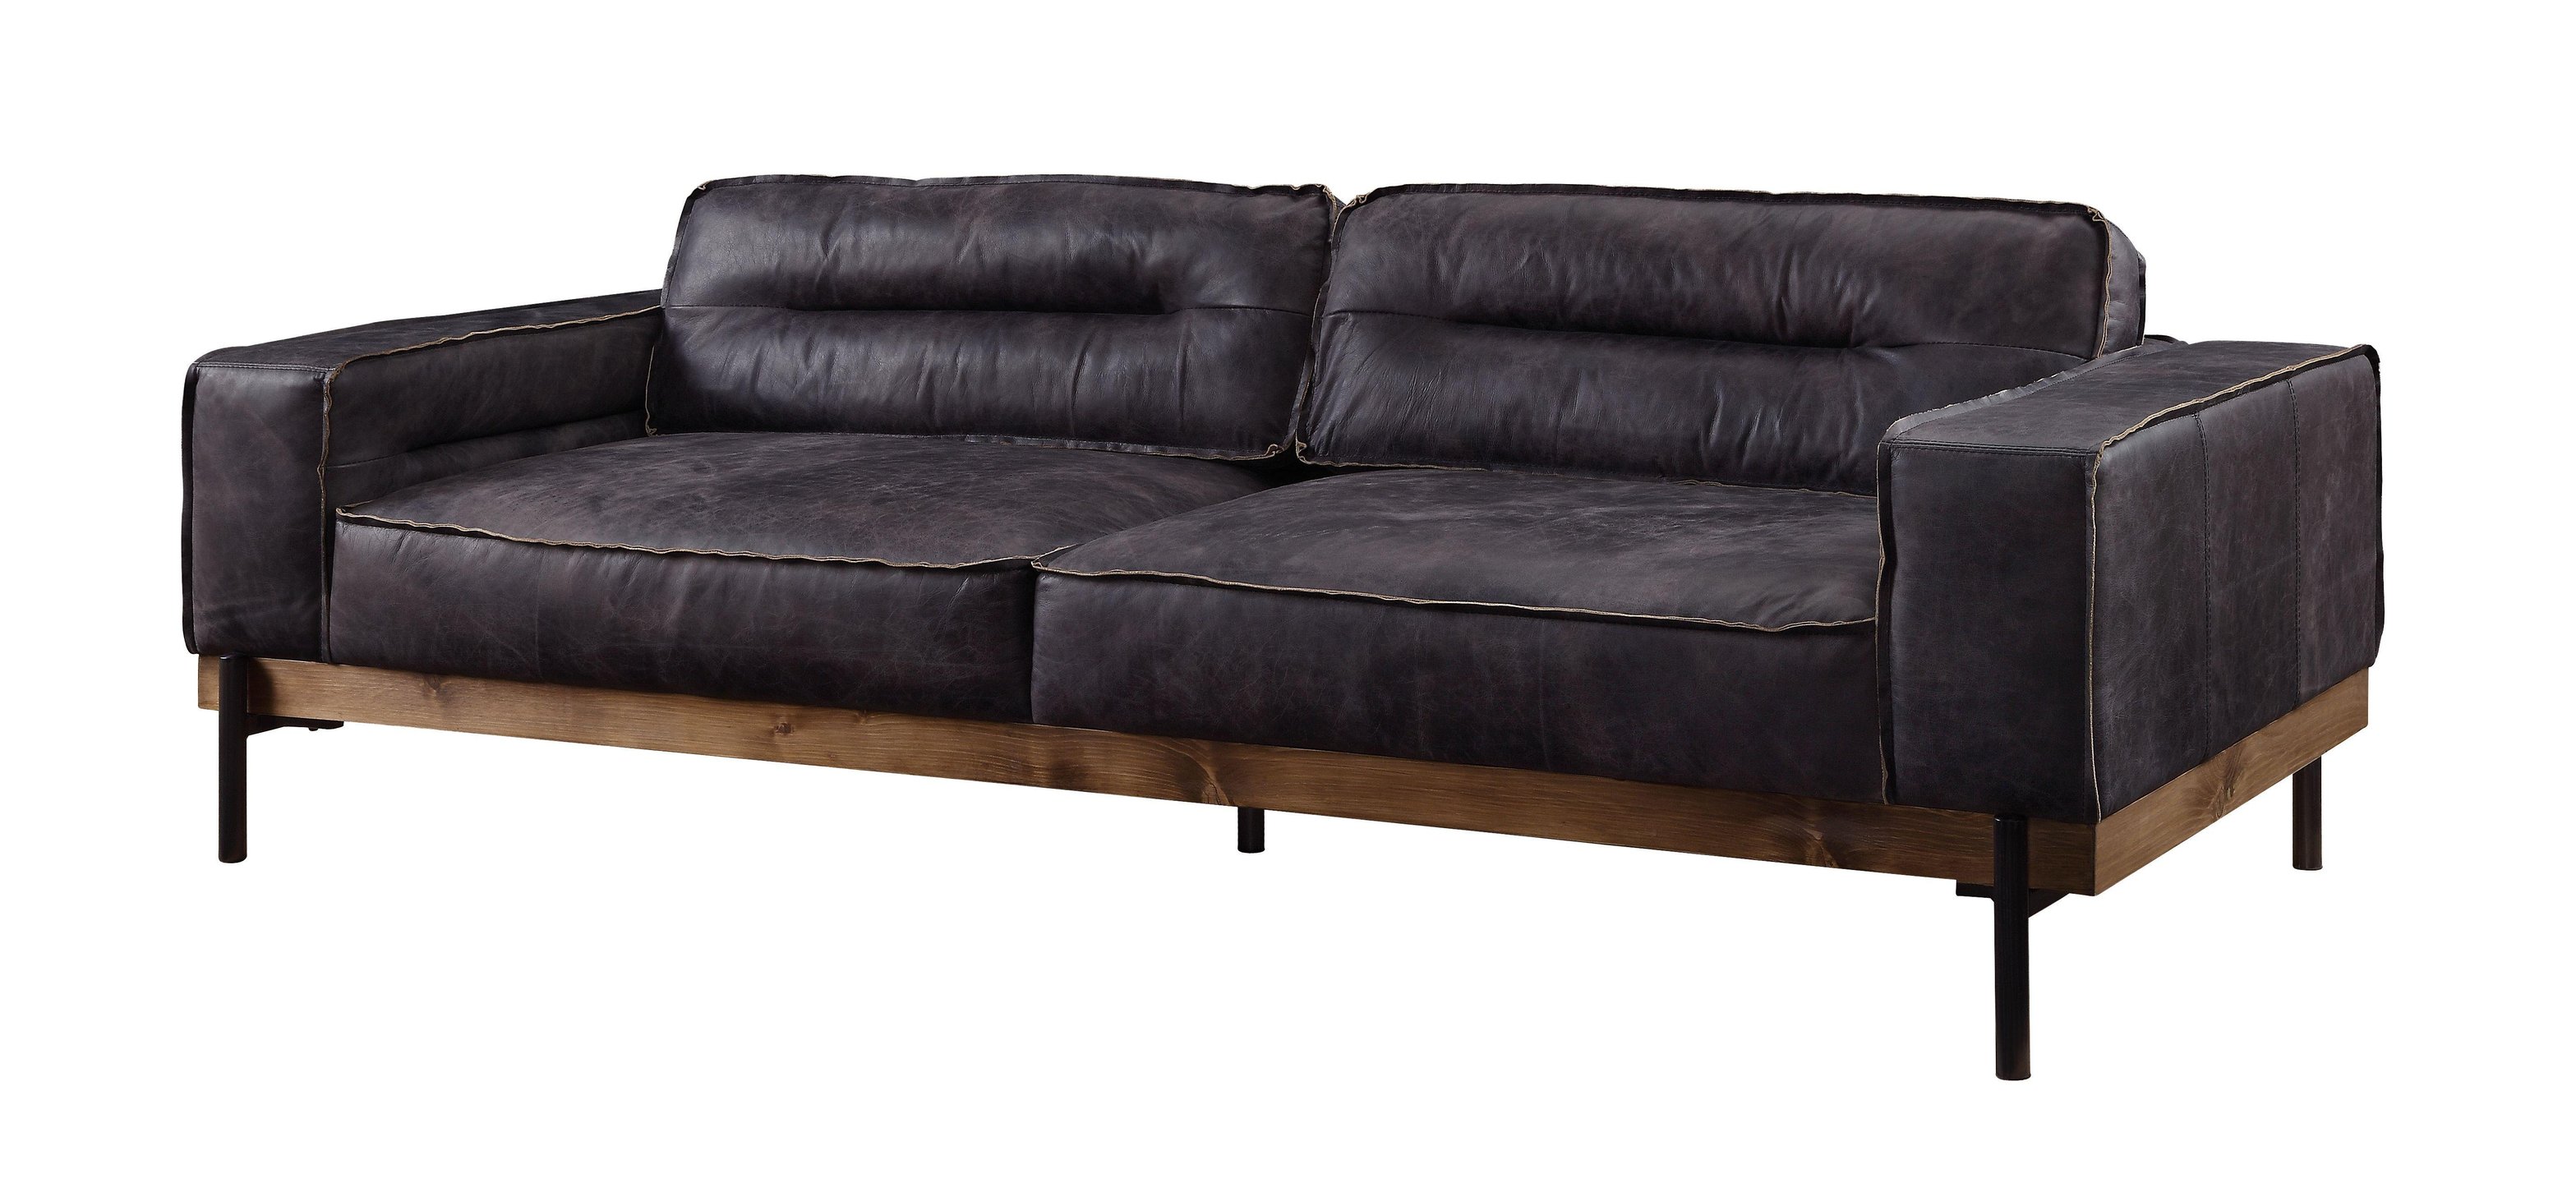 reviews on the acme silchester leather sofa